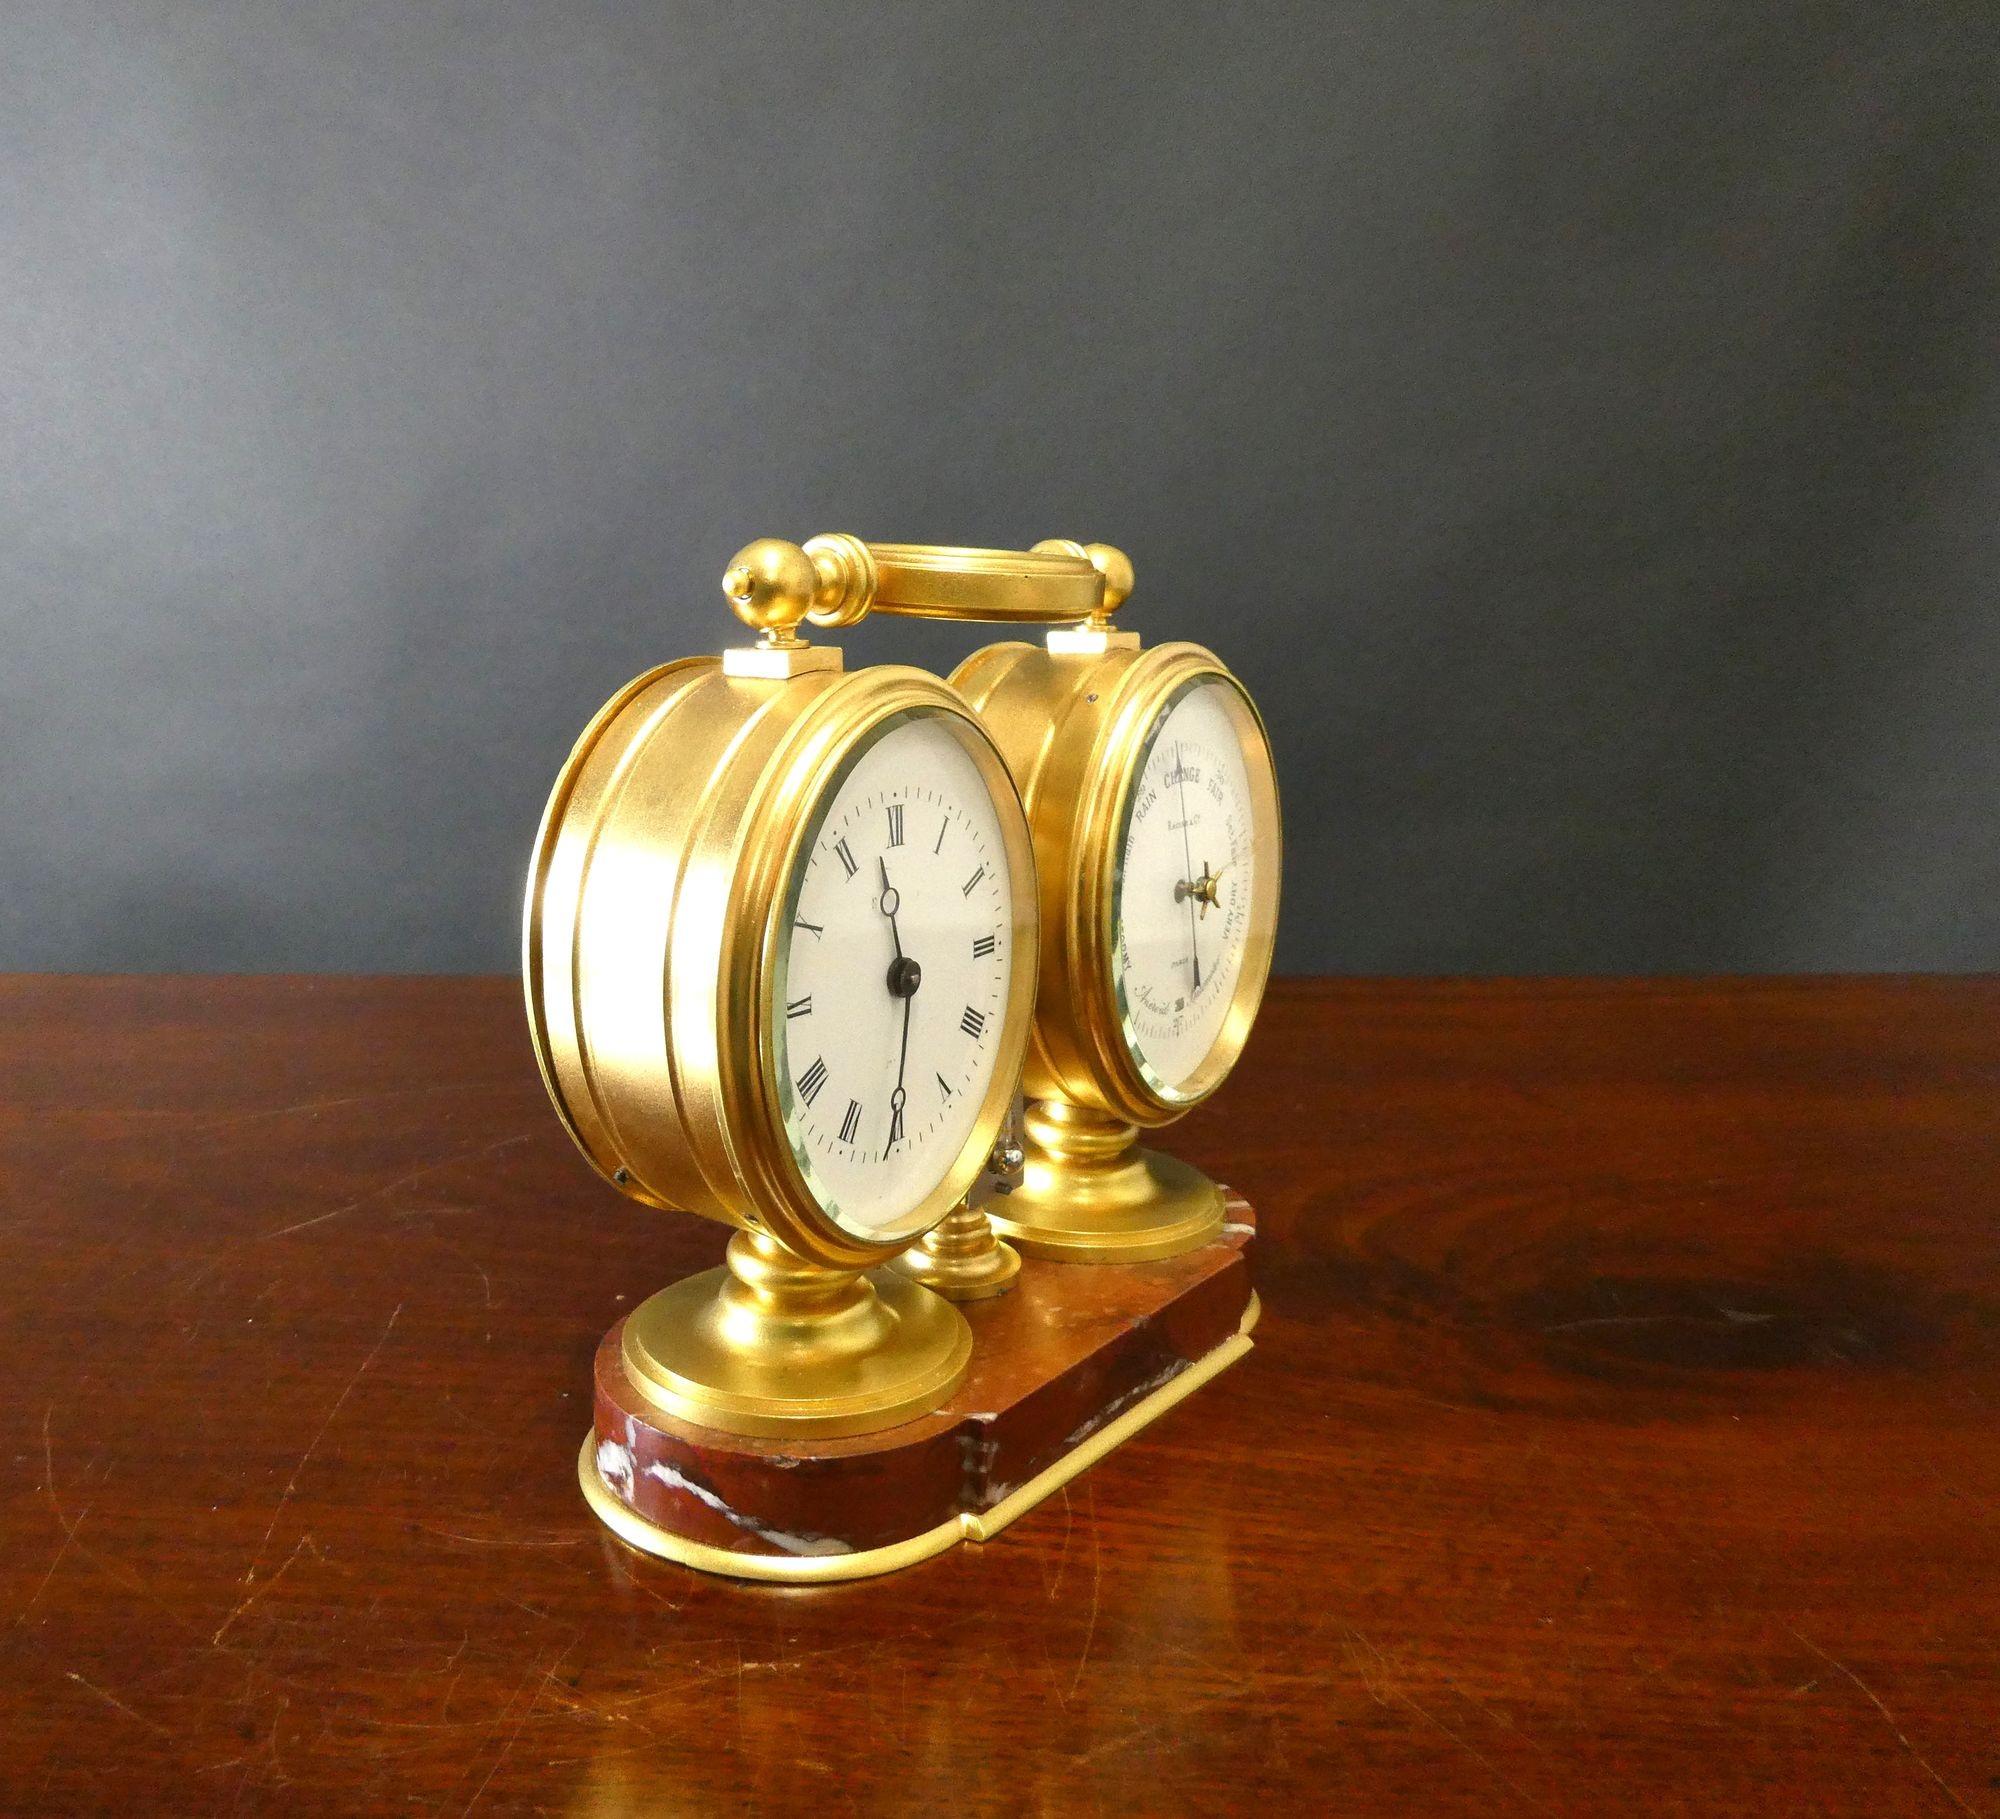 Housed in a gilded case standing on a raised, moulded rouge marble base with brass banding surmounted by a decorative gilded carrying handle.
The clock to the left with enamel dial, Roman numerals, original ‘blued’ steel hands. Eight day French